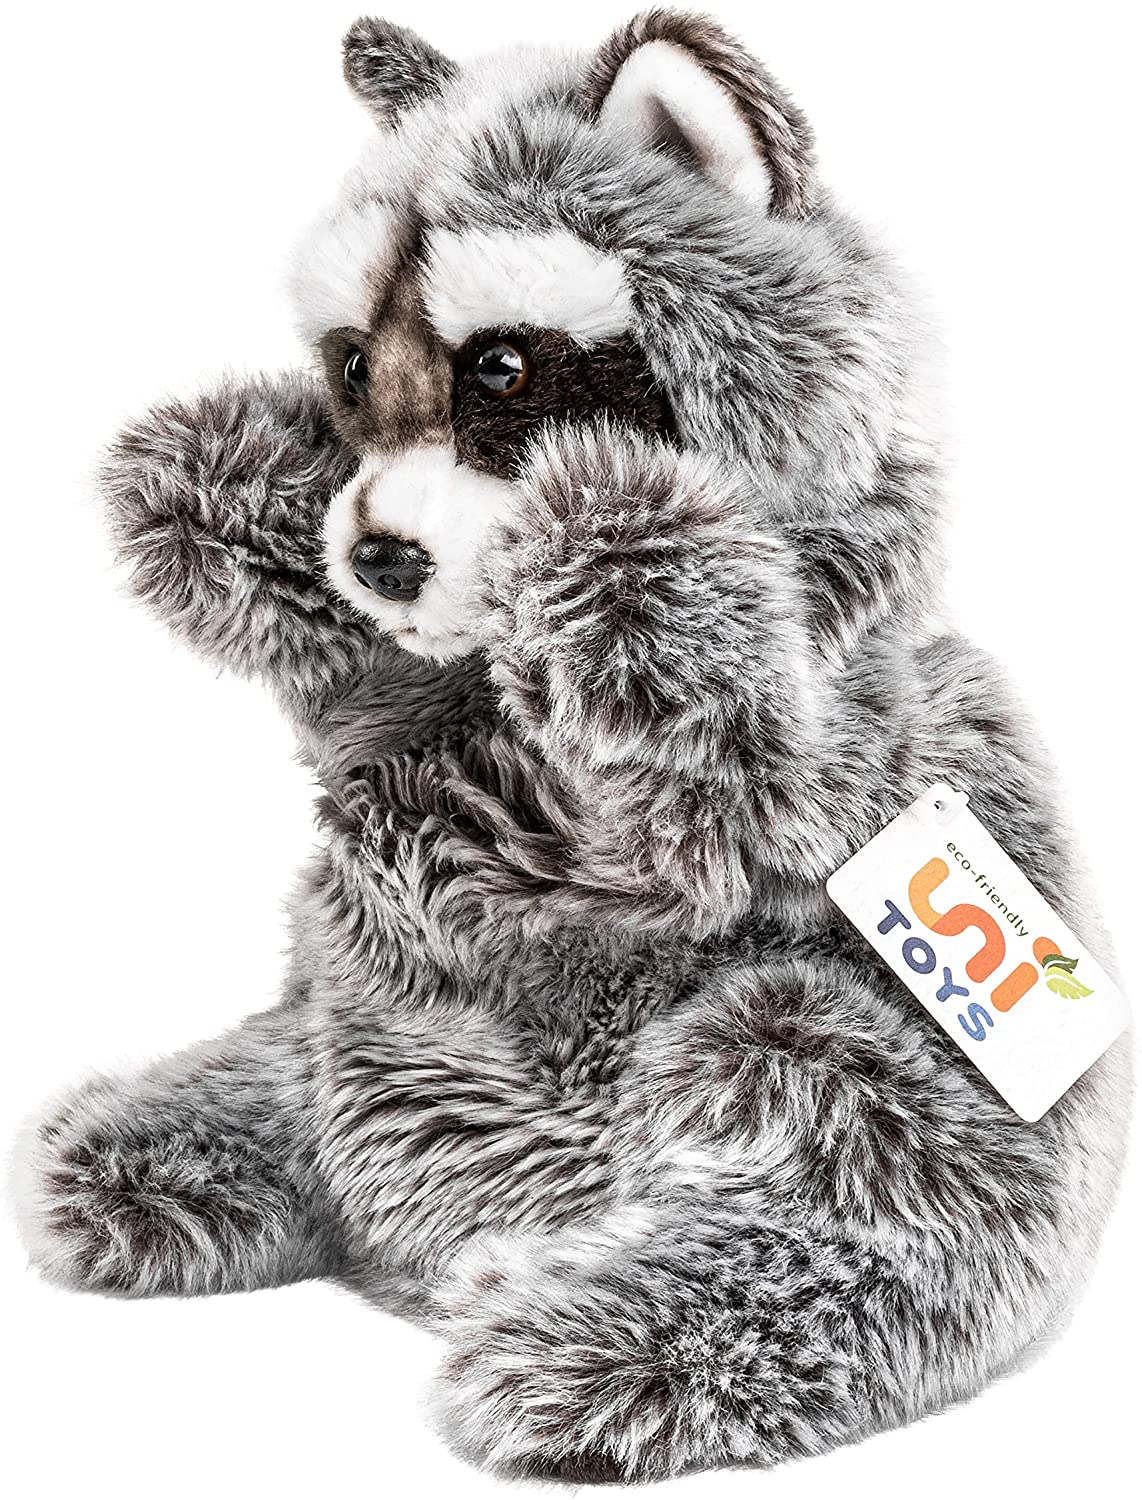 Uni-Toys - hand puppet raccoon - 26 cm (height) - bear, forest animal - plush toy, cuddly toy 